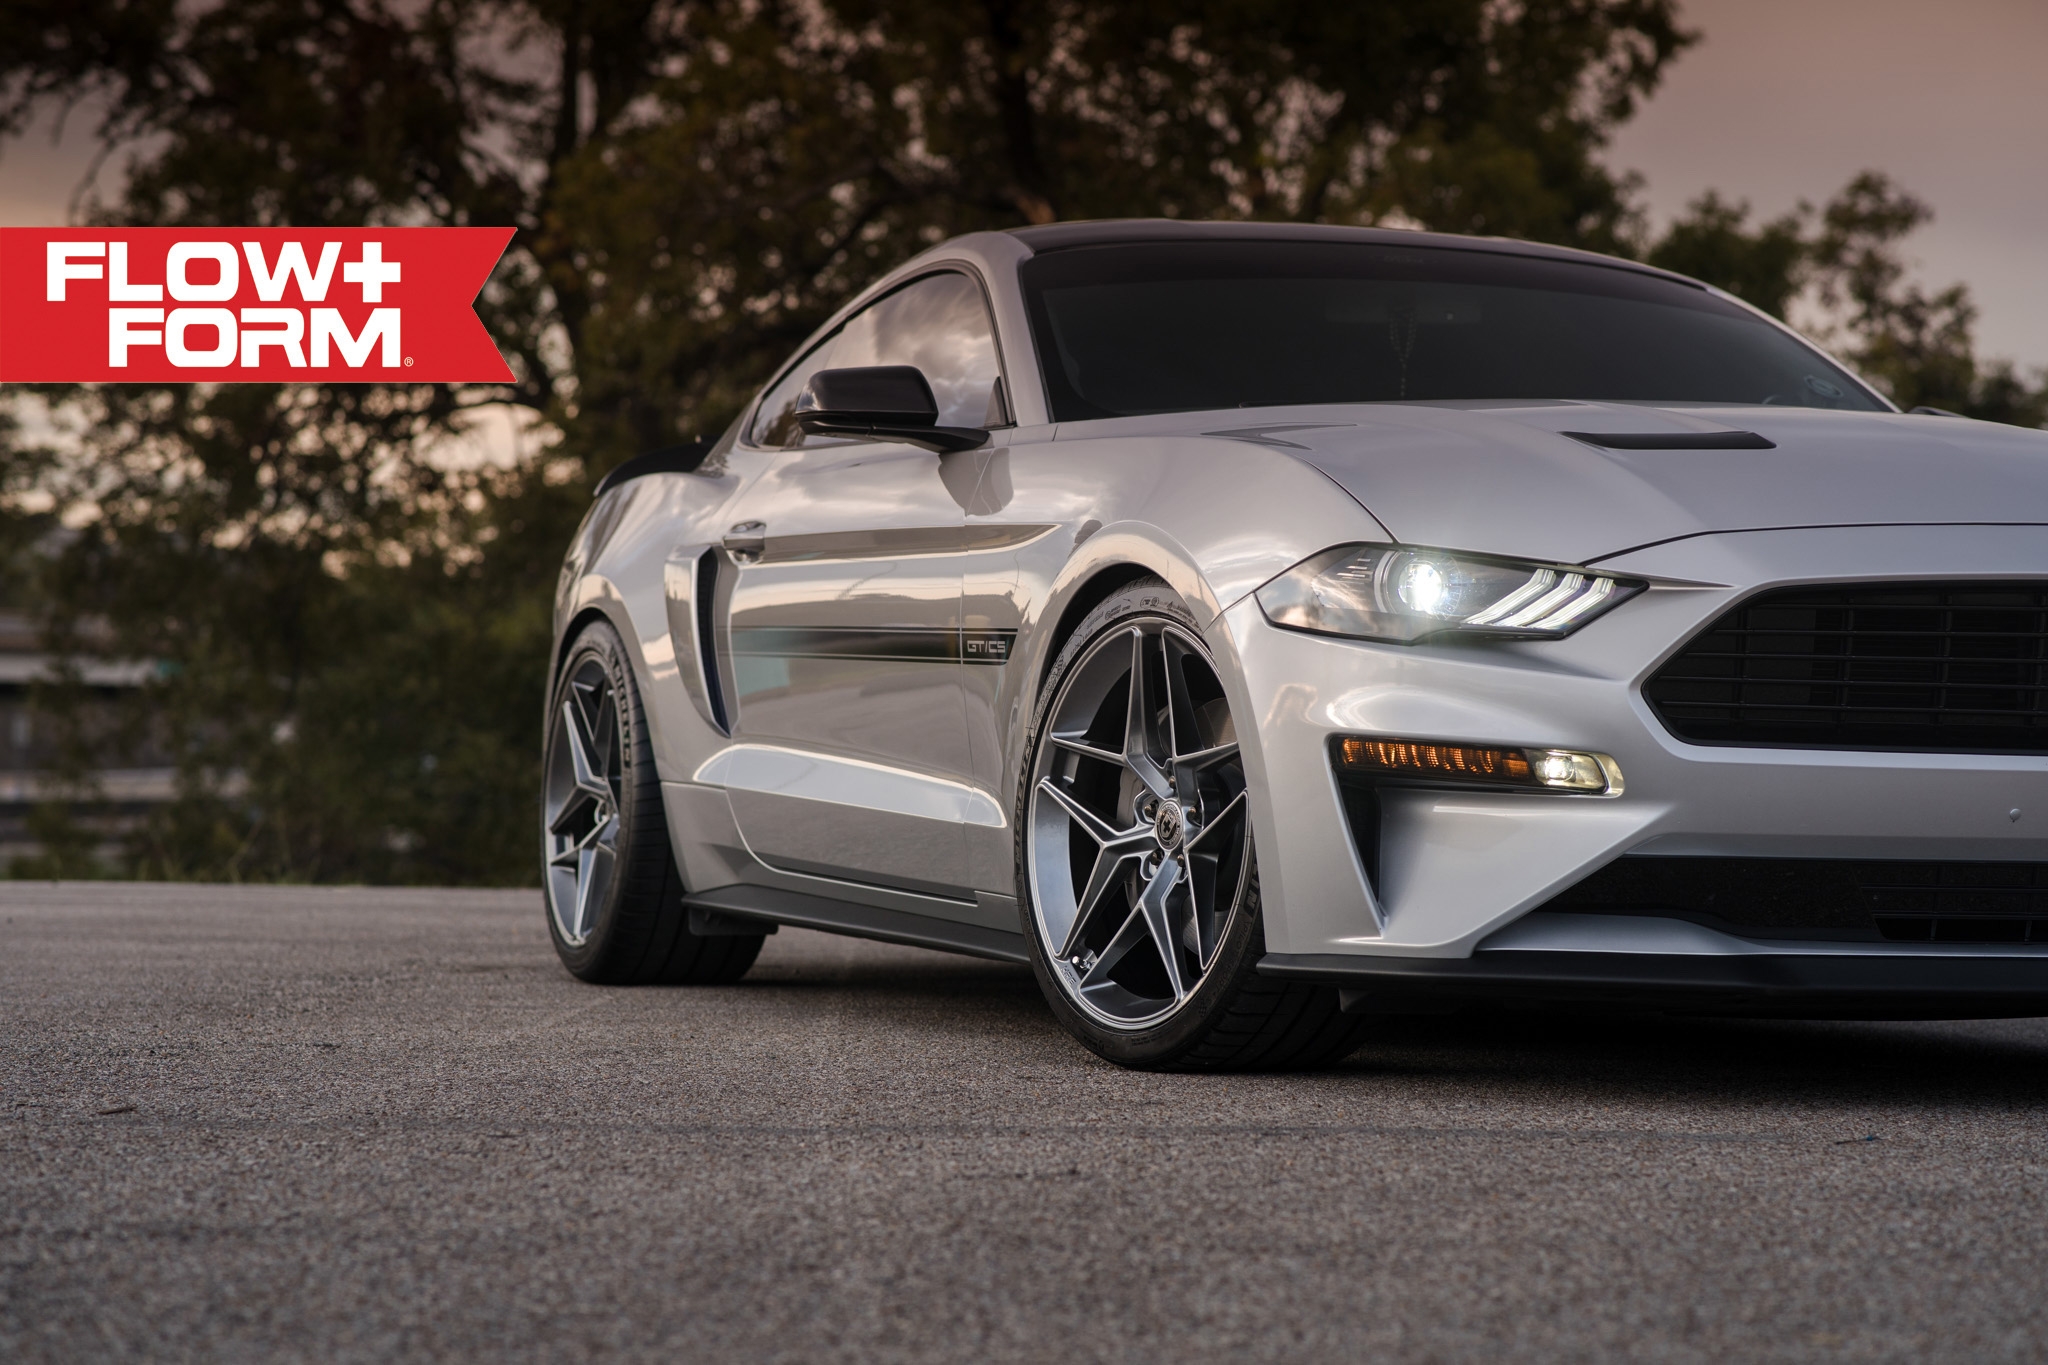 S650 Mustang HRE Holiday Sale Ends DEC 31st - LIMITED STOCK - Vibe Motorsports 2